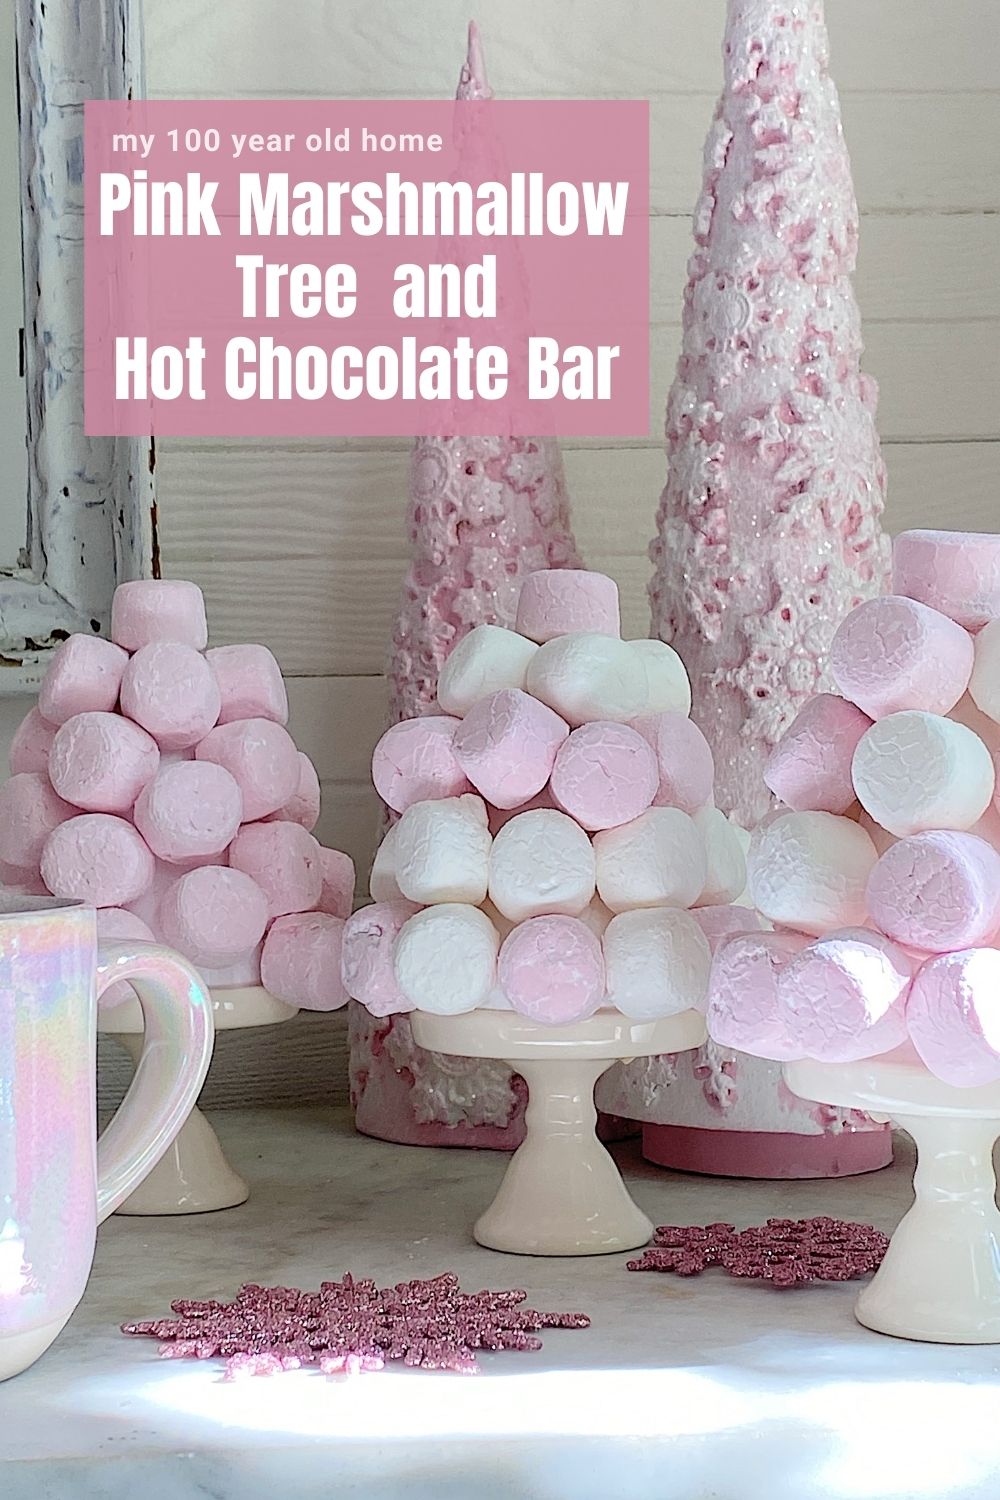 I created this Pink Marshmallow Hot Chocolate Bar with very cute marshmallow trees. The trees look great and taste delicious!